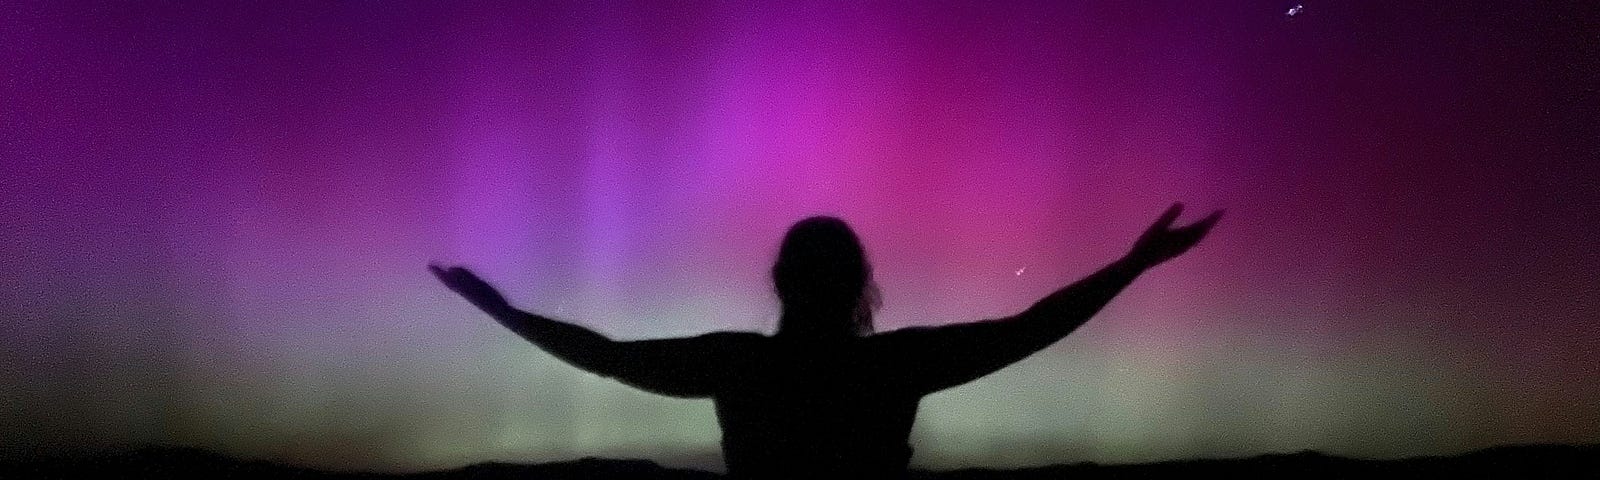 Person with outstretched arms silhouetted against the Northern Lights